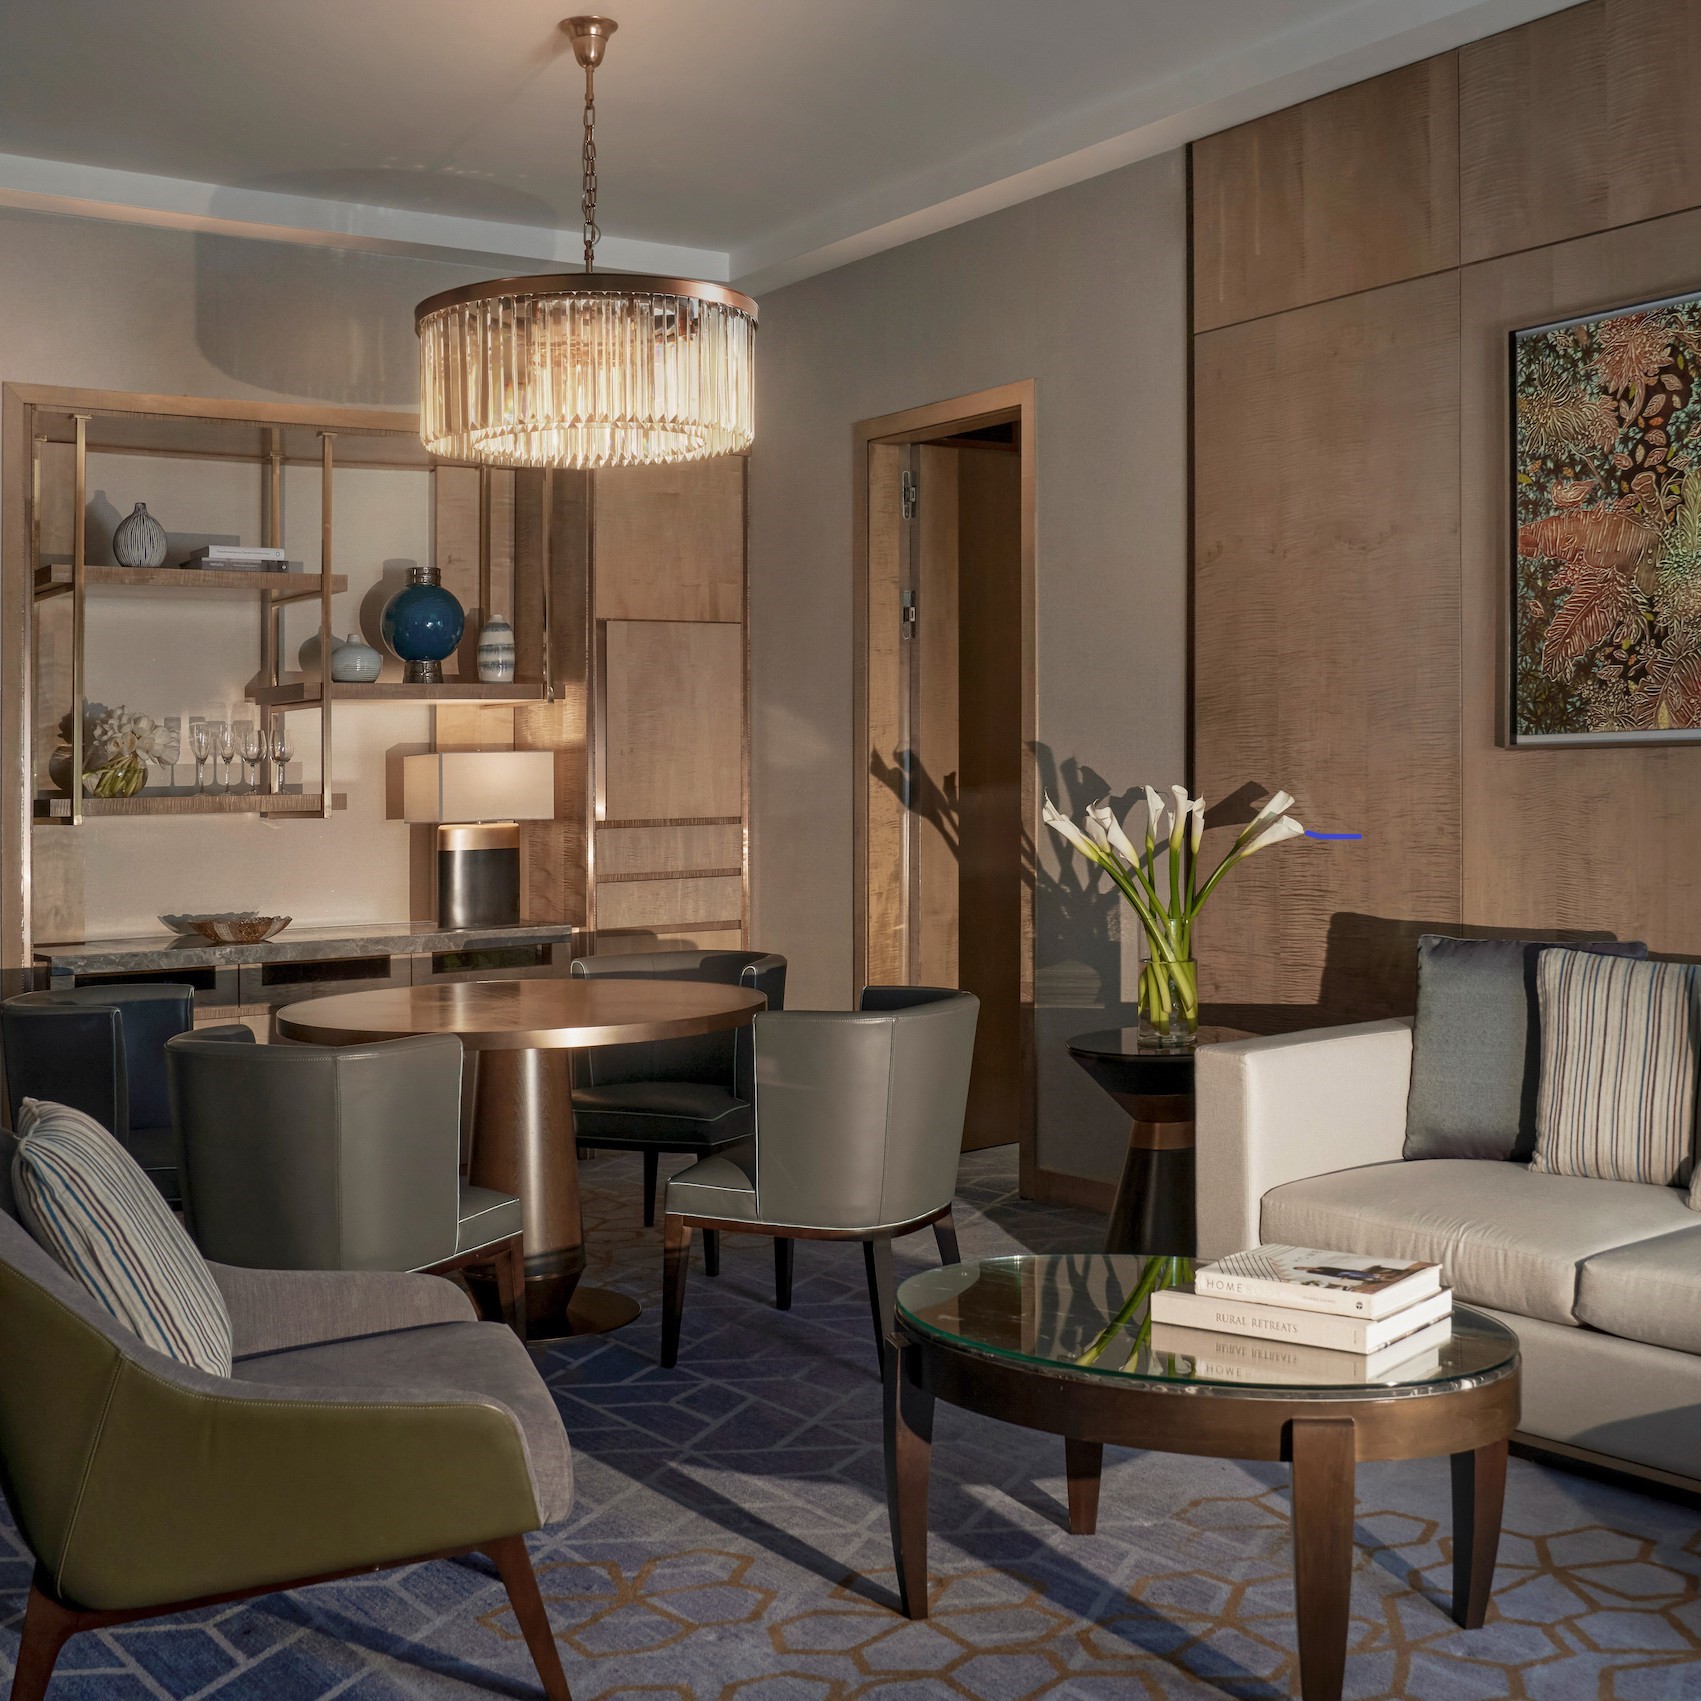 Luxurious accommodation and Club InterContinental benefits with Royal Suite at InterContinental Hanoi Landmark72